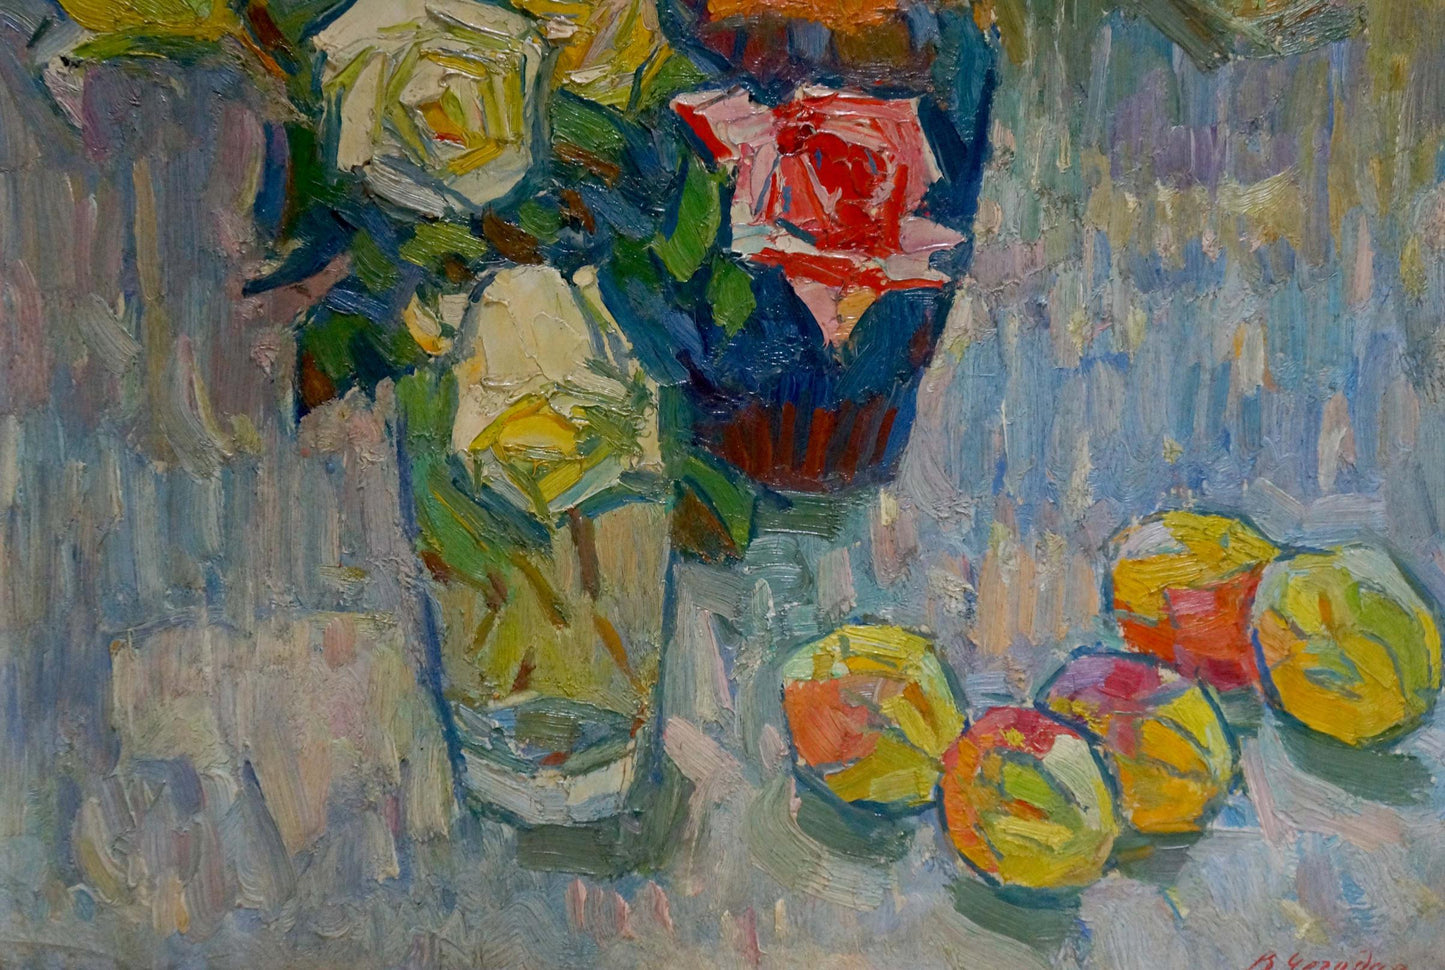 Vasily Chegodar's oil painting depicts roses and fruits